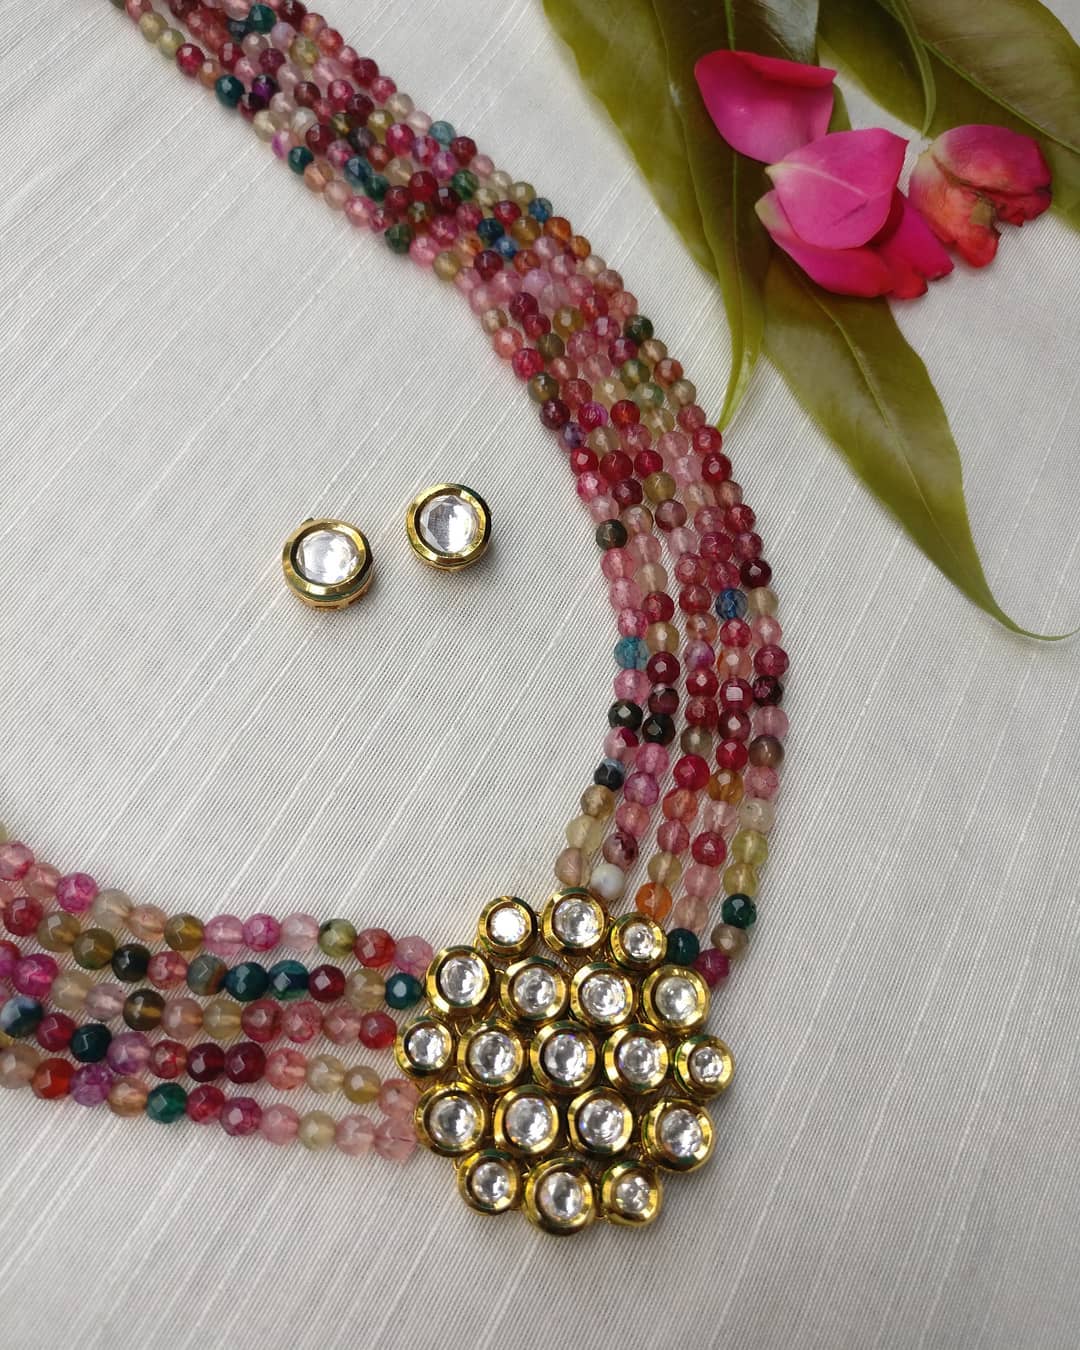 Multicoulour Beads With Kundan Necklace From Rimli Boutique